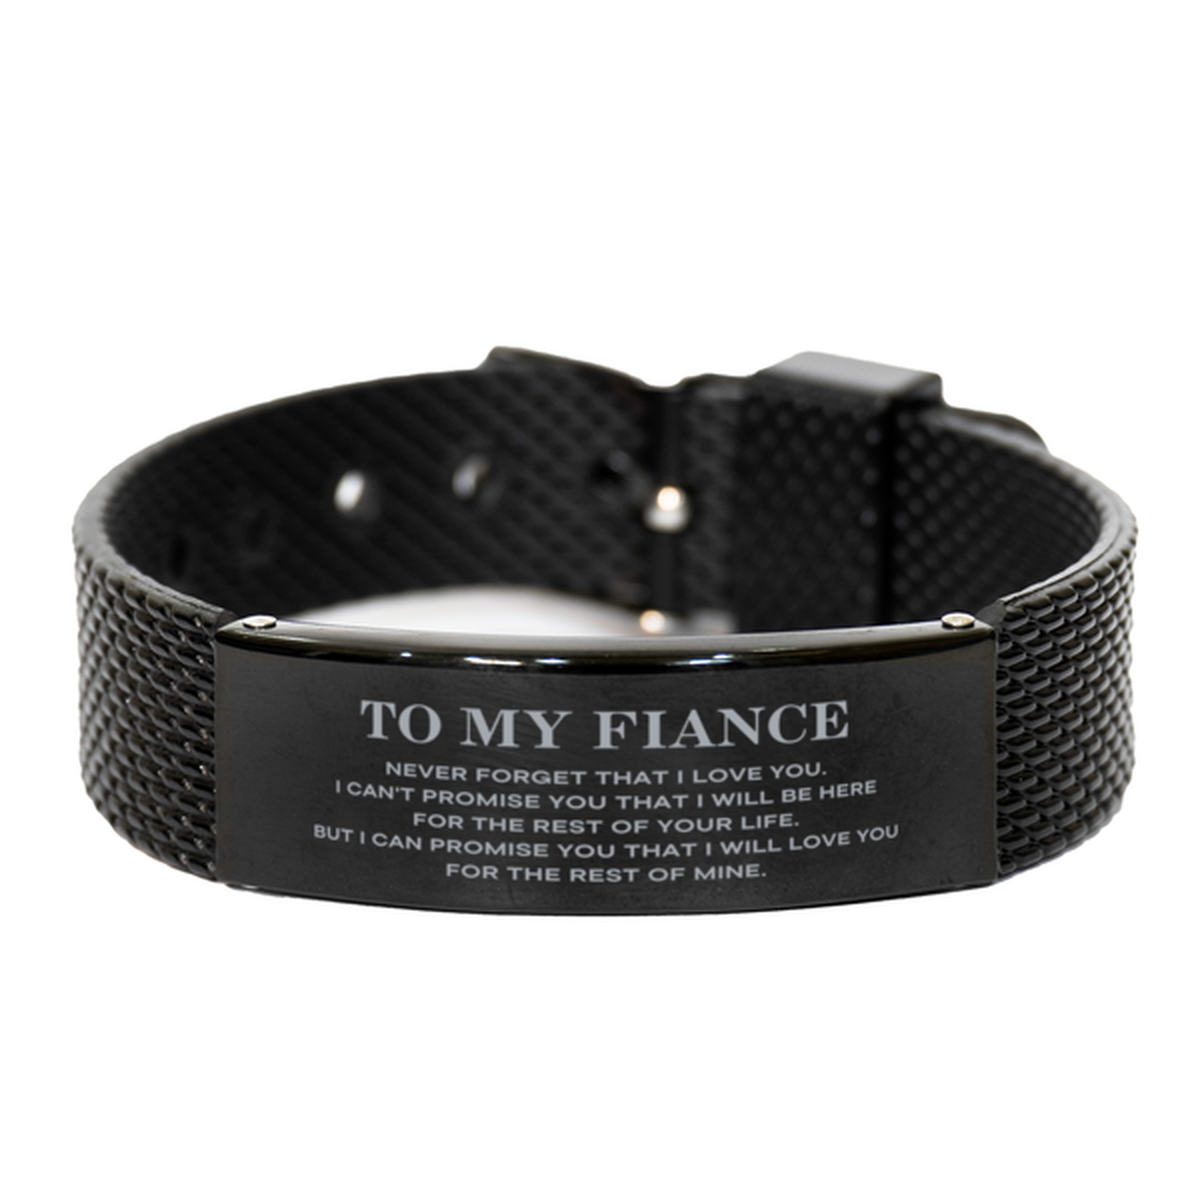 To My Fiance Gifts, I will love you for the rest of mine, Love Fiance Bracelet, Birthday Christmas Unique Black Shark Mesh Bracelet For Fiance